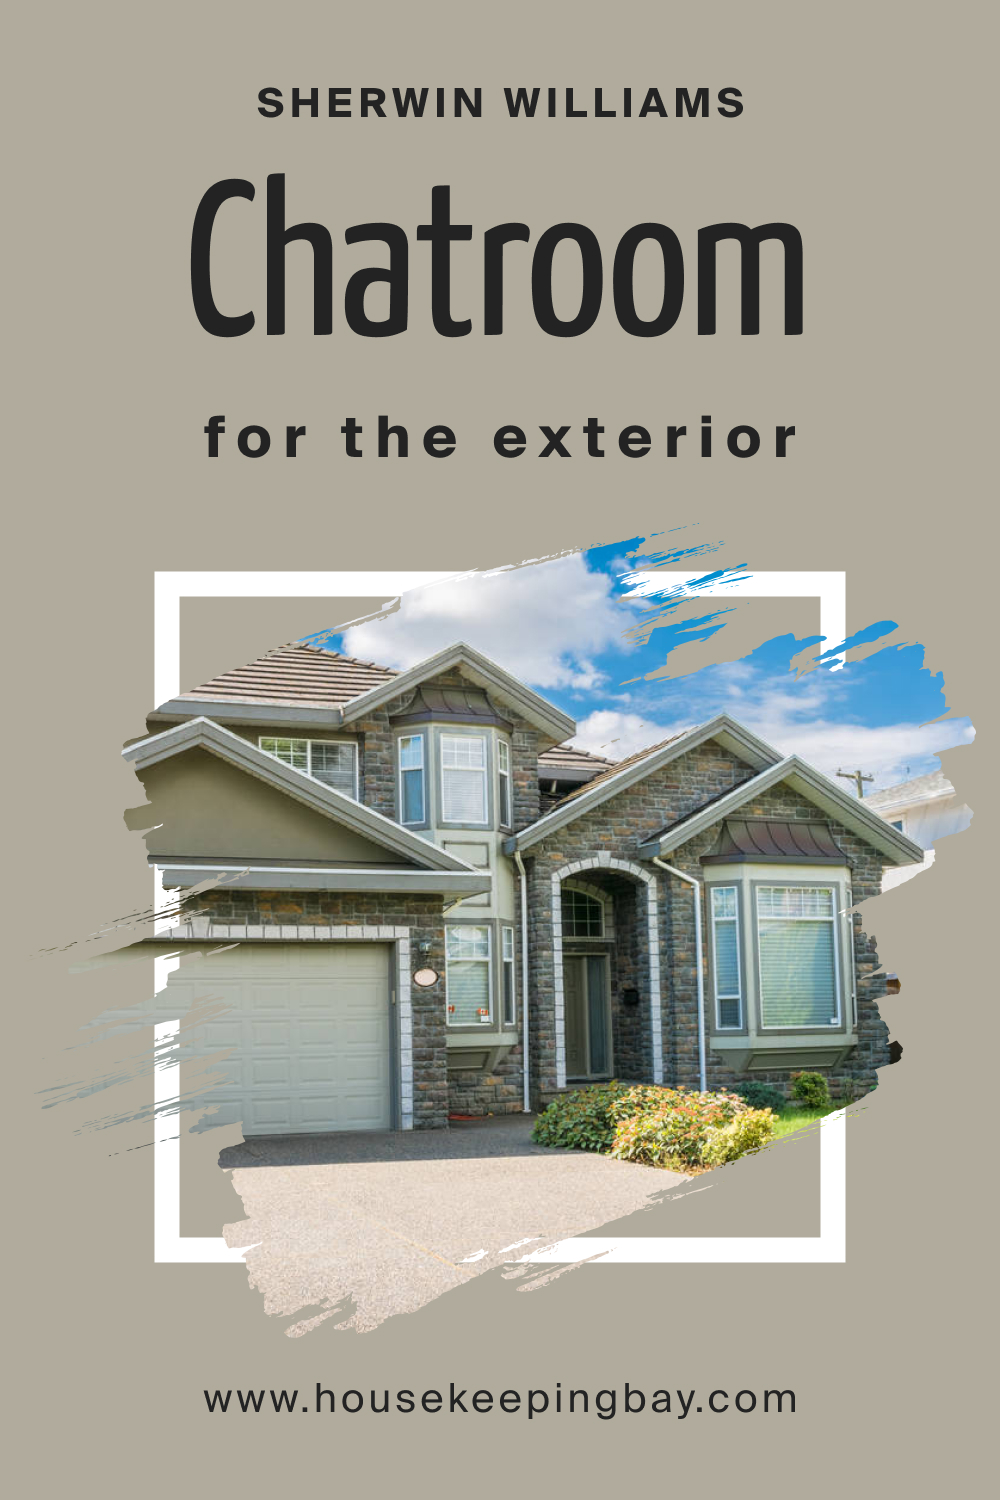 Sherwin Williams. SW 6171 Chatroom For the exterior